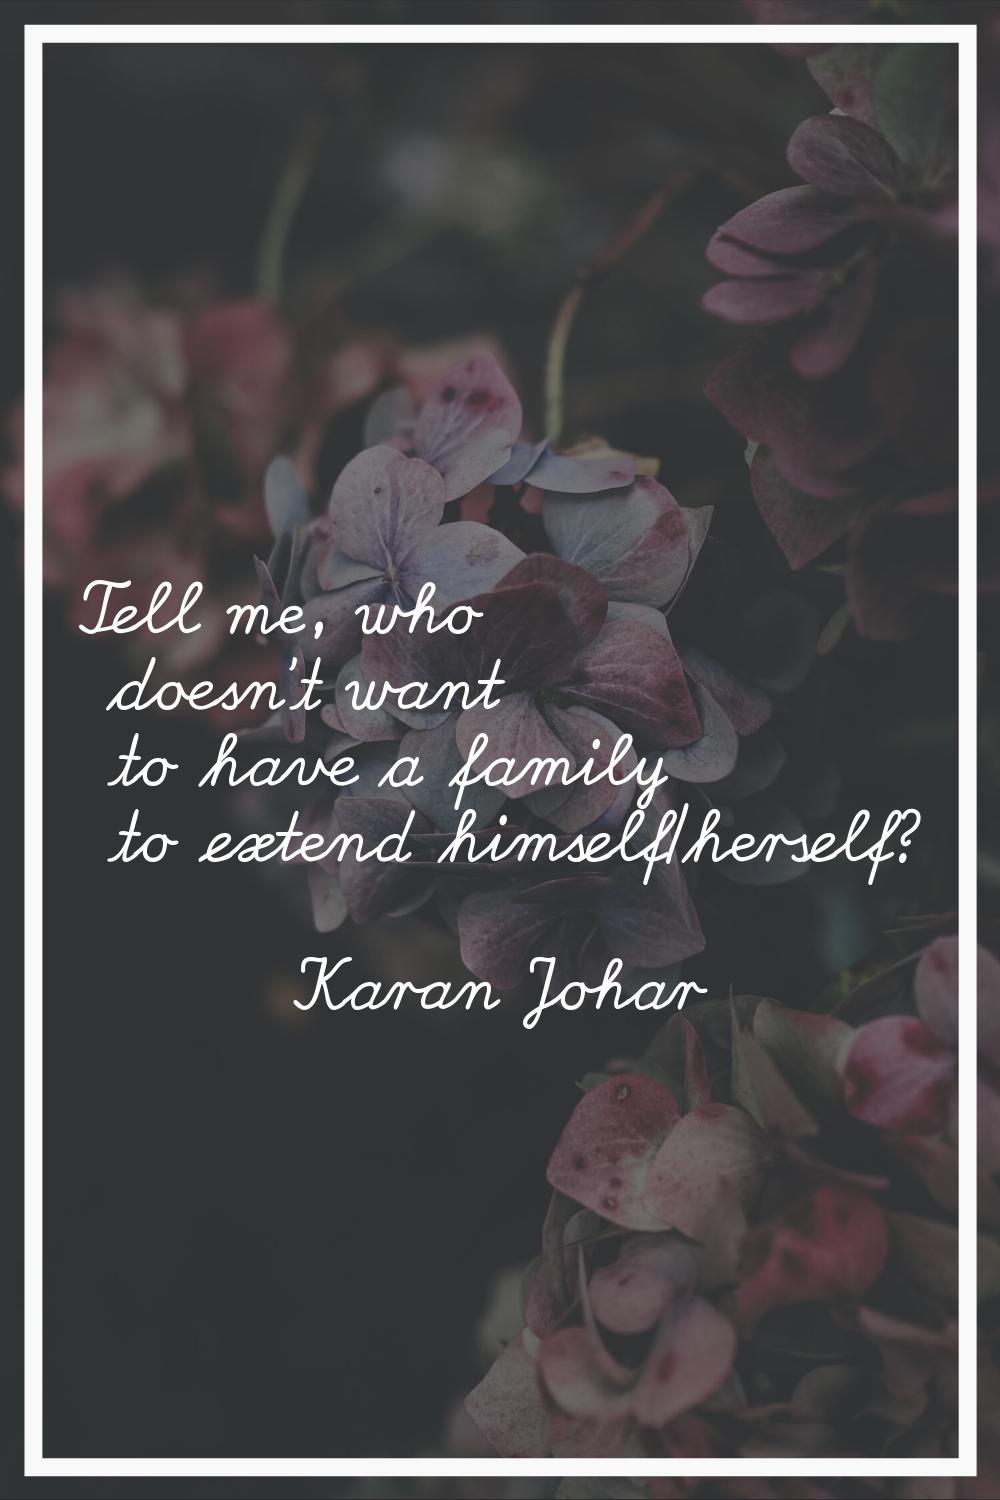 Tell me, who doesn't want to have a family to extend himself/herself?